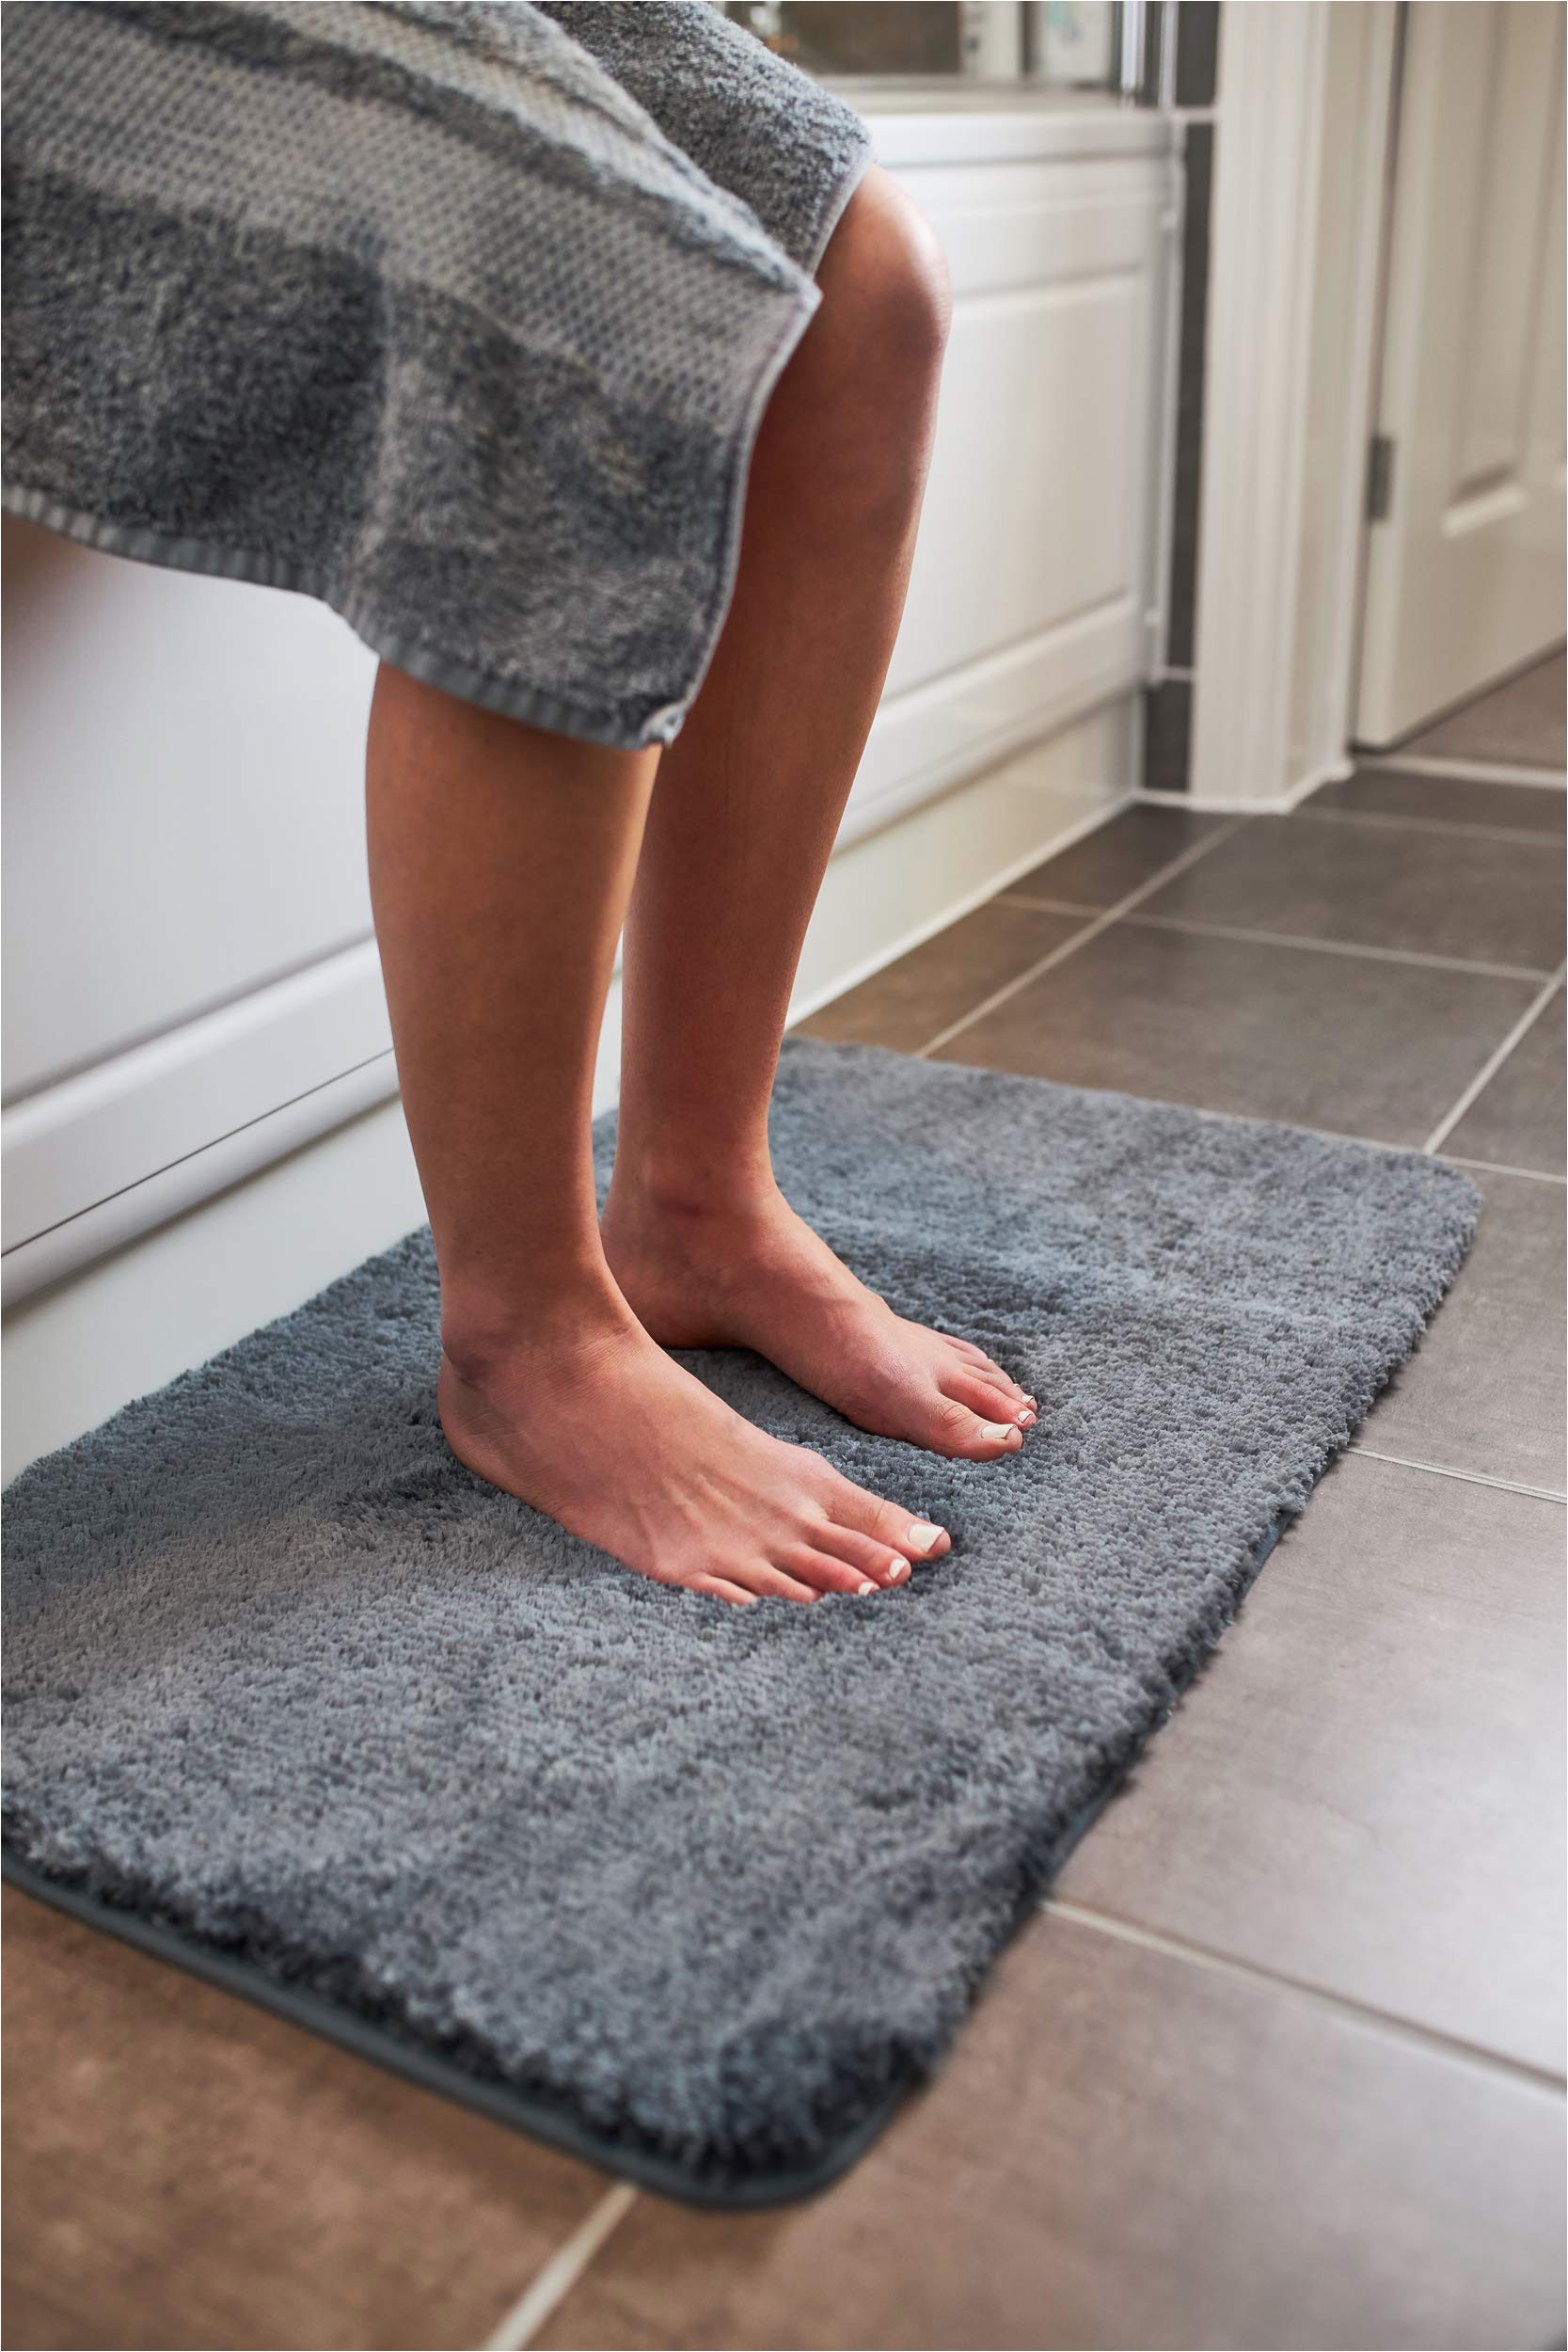 Oversized Bath Rugs Mat Luxury Grey Bath Mat Microfiber Non Slip Bath Rug with Super soft Absorbent Dry Fast Design for Bath and Shower